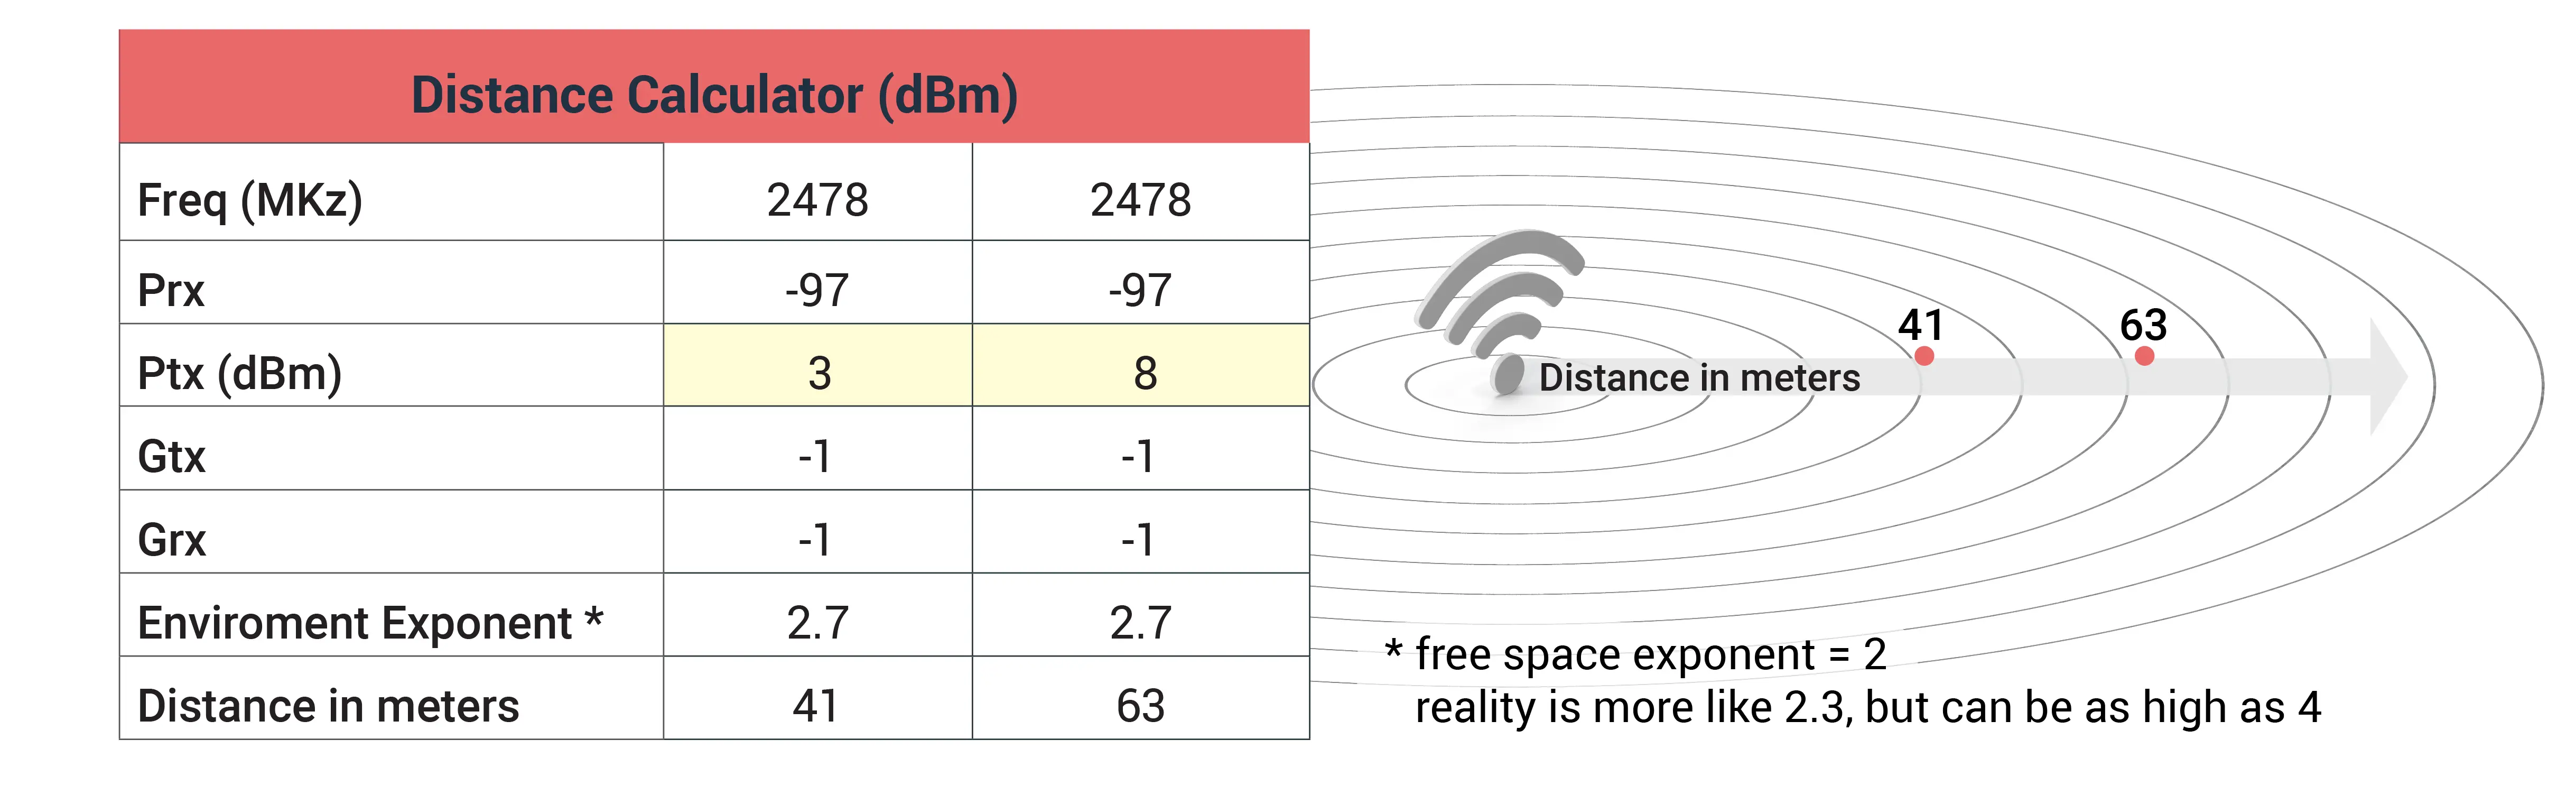 Antenna distance comparison table 2 when environment exponent is 2.7